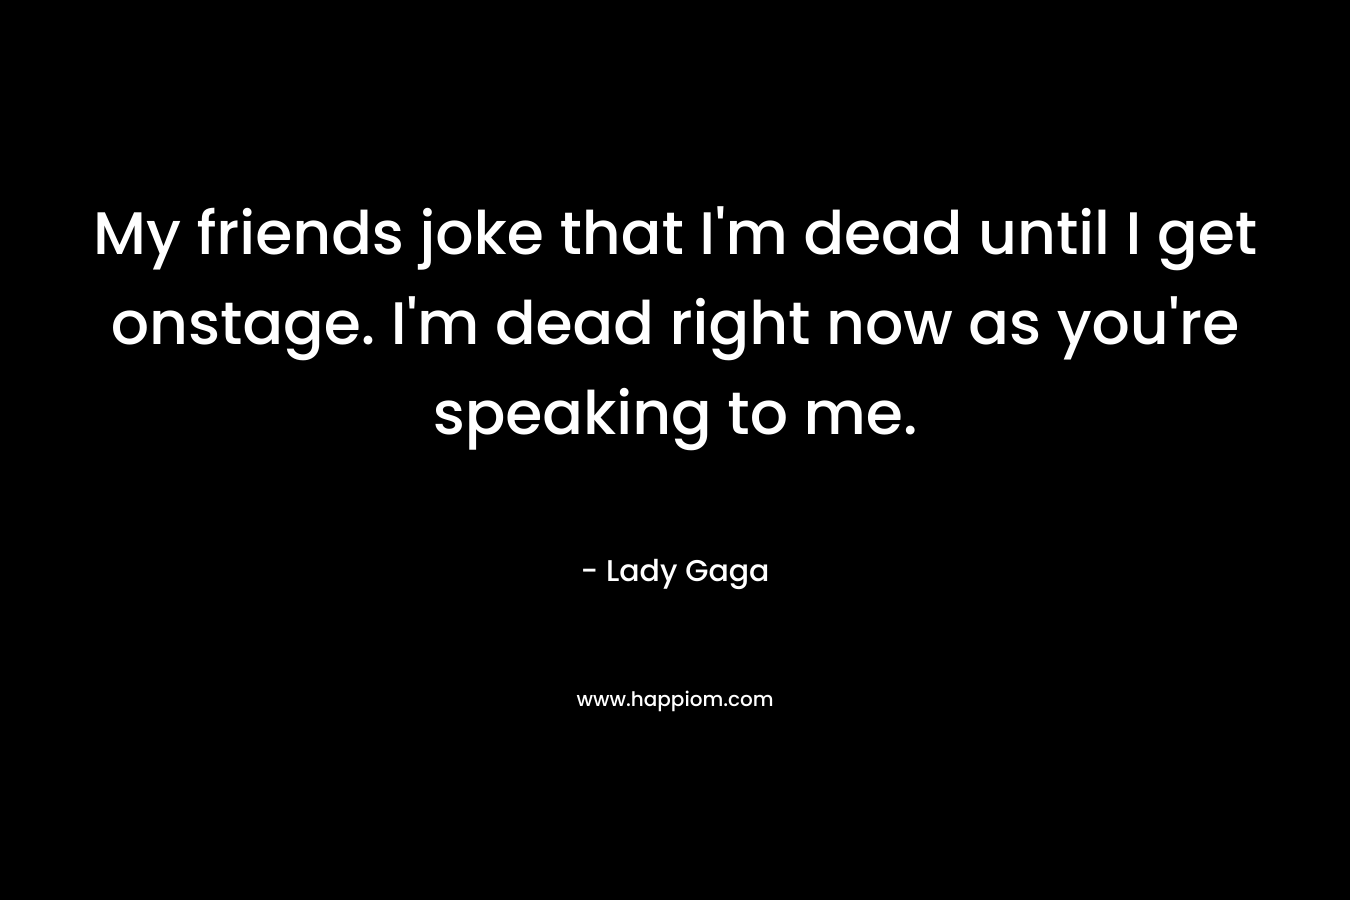 My friends joke that I'm dead until I get onstage. I'm dead right now as you're speaking to me.